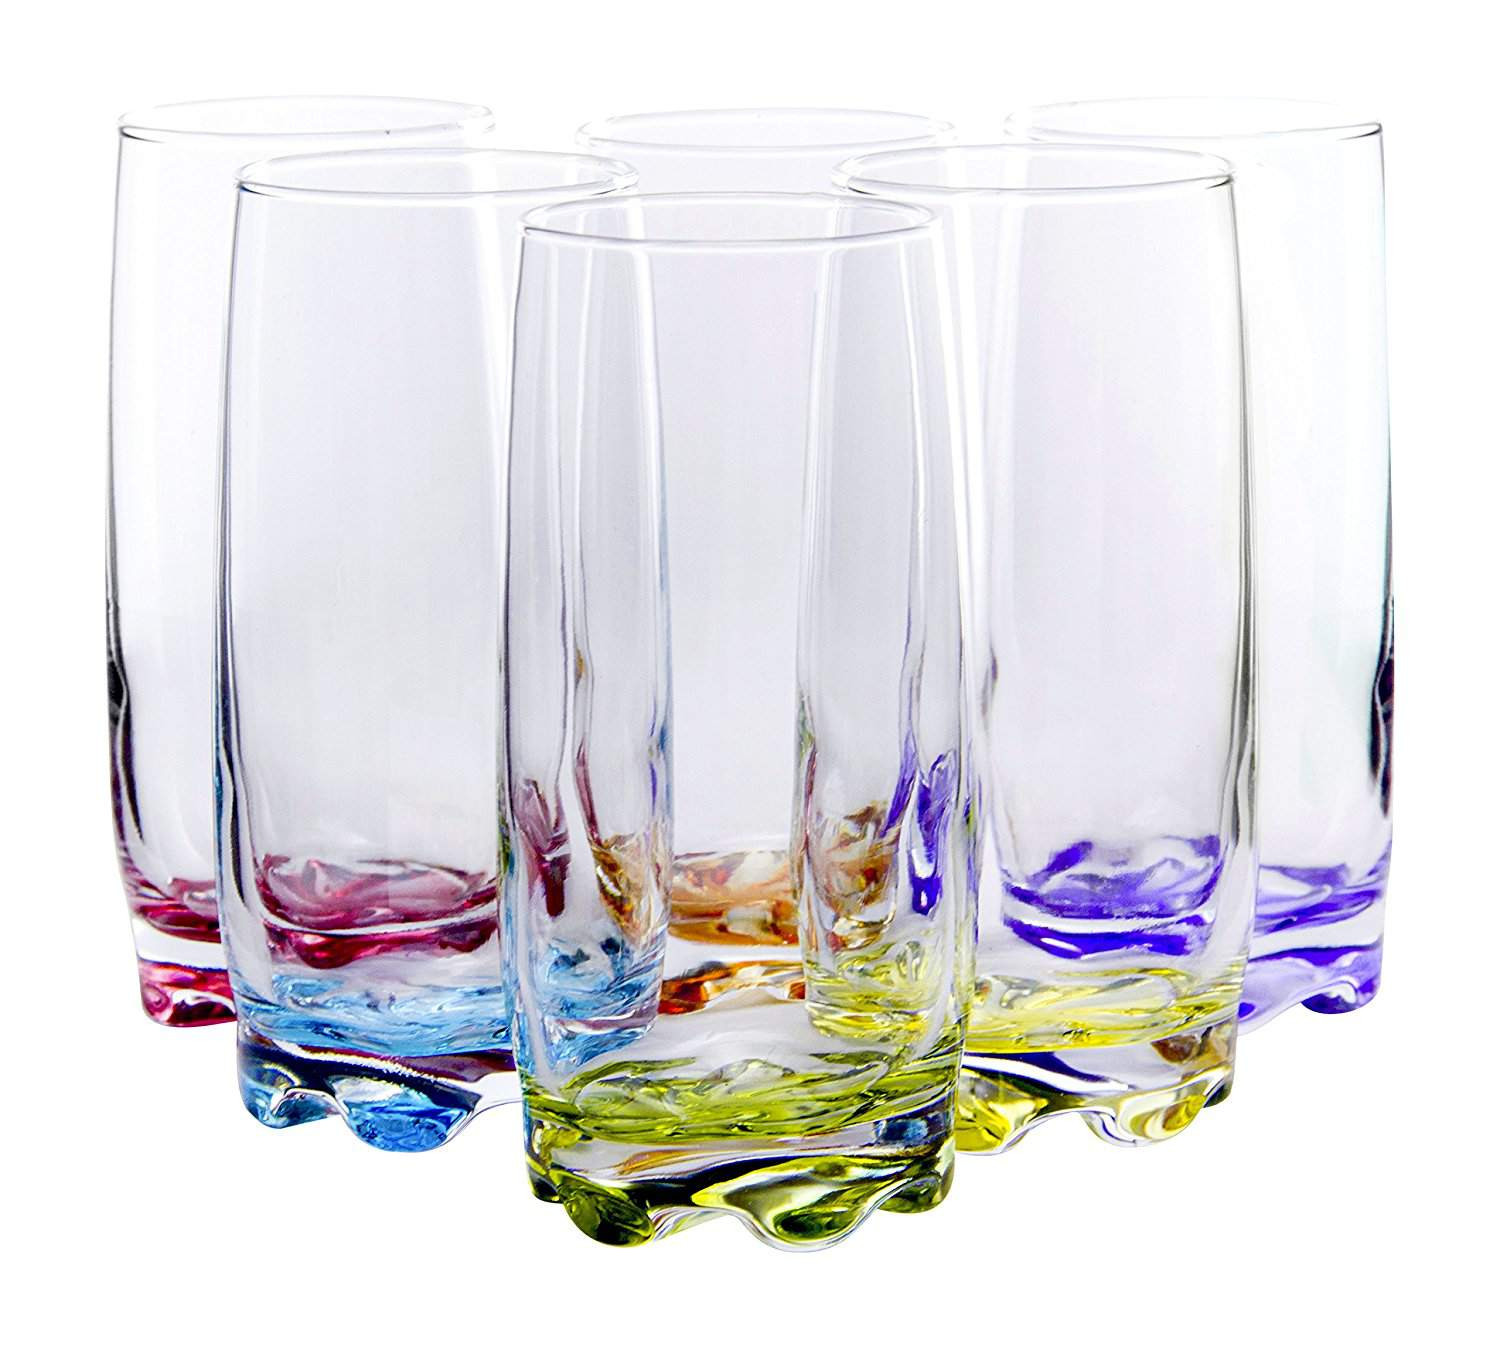 10 Lovable Amazon Clear Glass Vases 2024 free download amazon clear glass vases of the 7 best drinking glasses to buy in 2018 for vibrant splash water beverage highball glasses 13 25 ounce set of 6